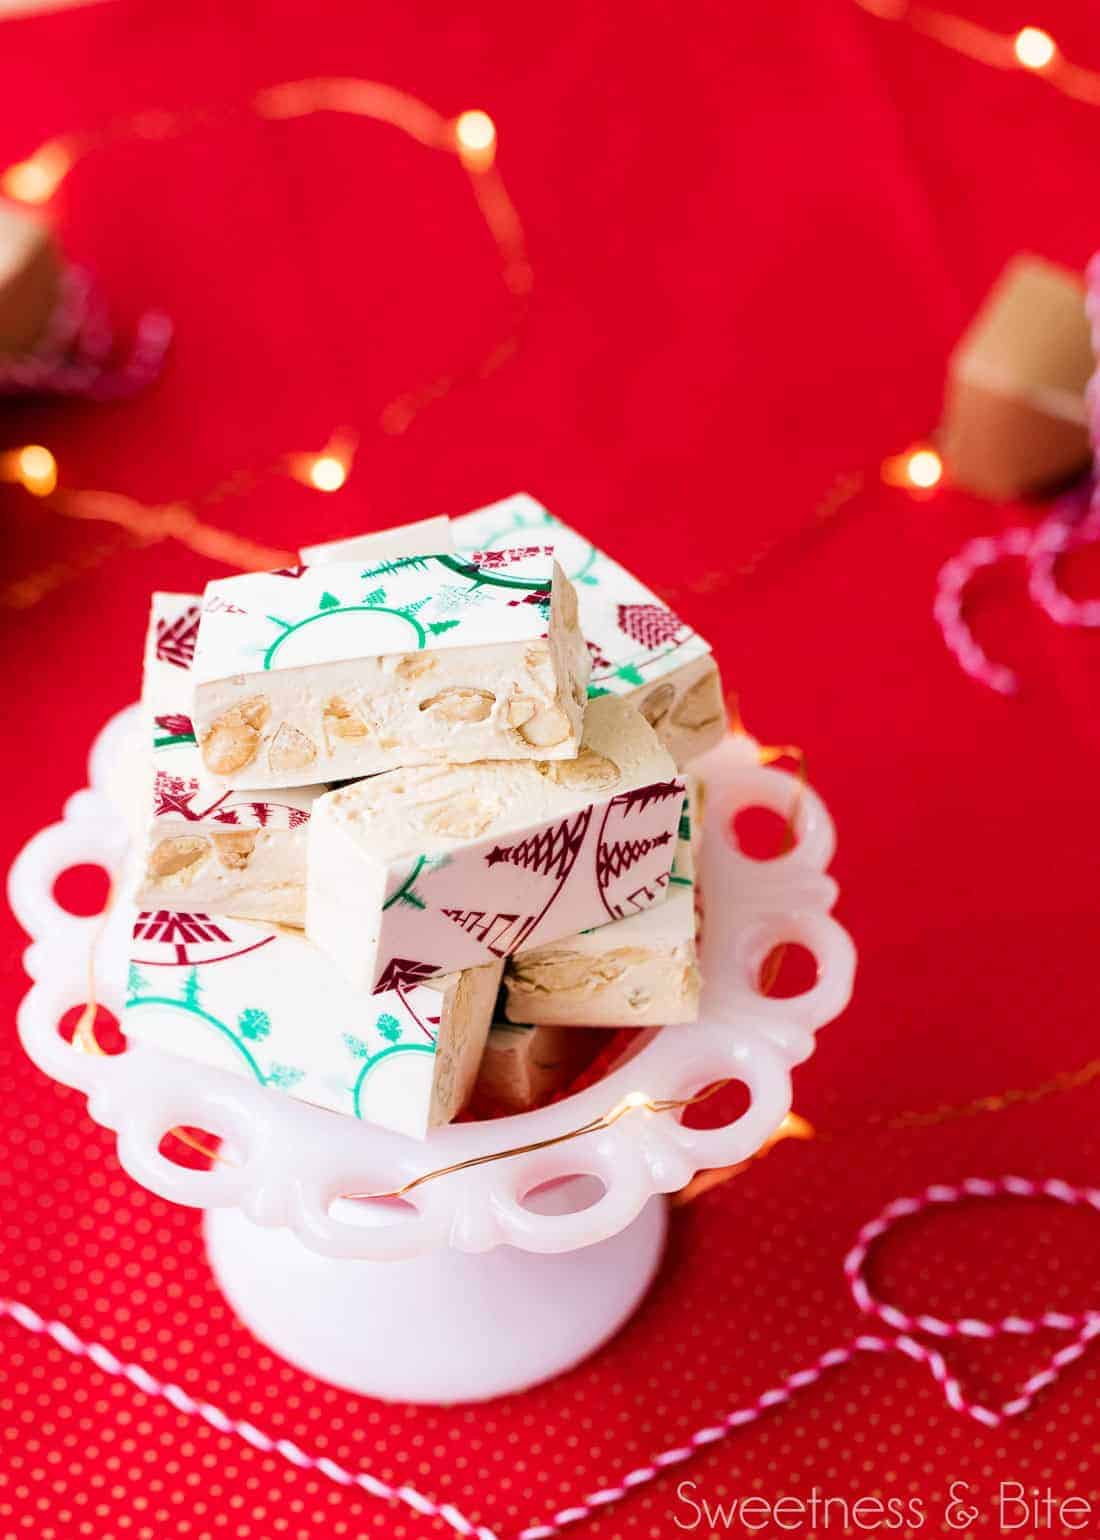 Festive Almond and Honey Nougat ~ Classic nougat with festive printed wafer paper ~ by Sweetness & Bite